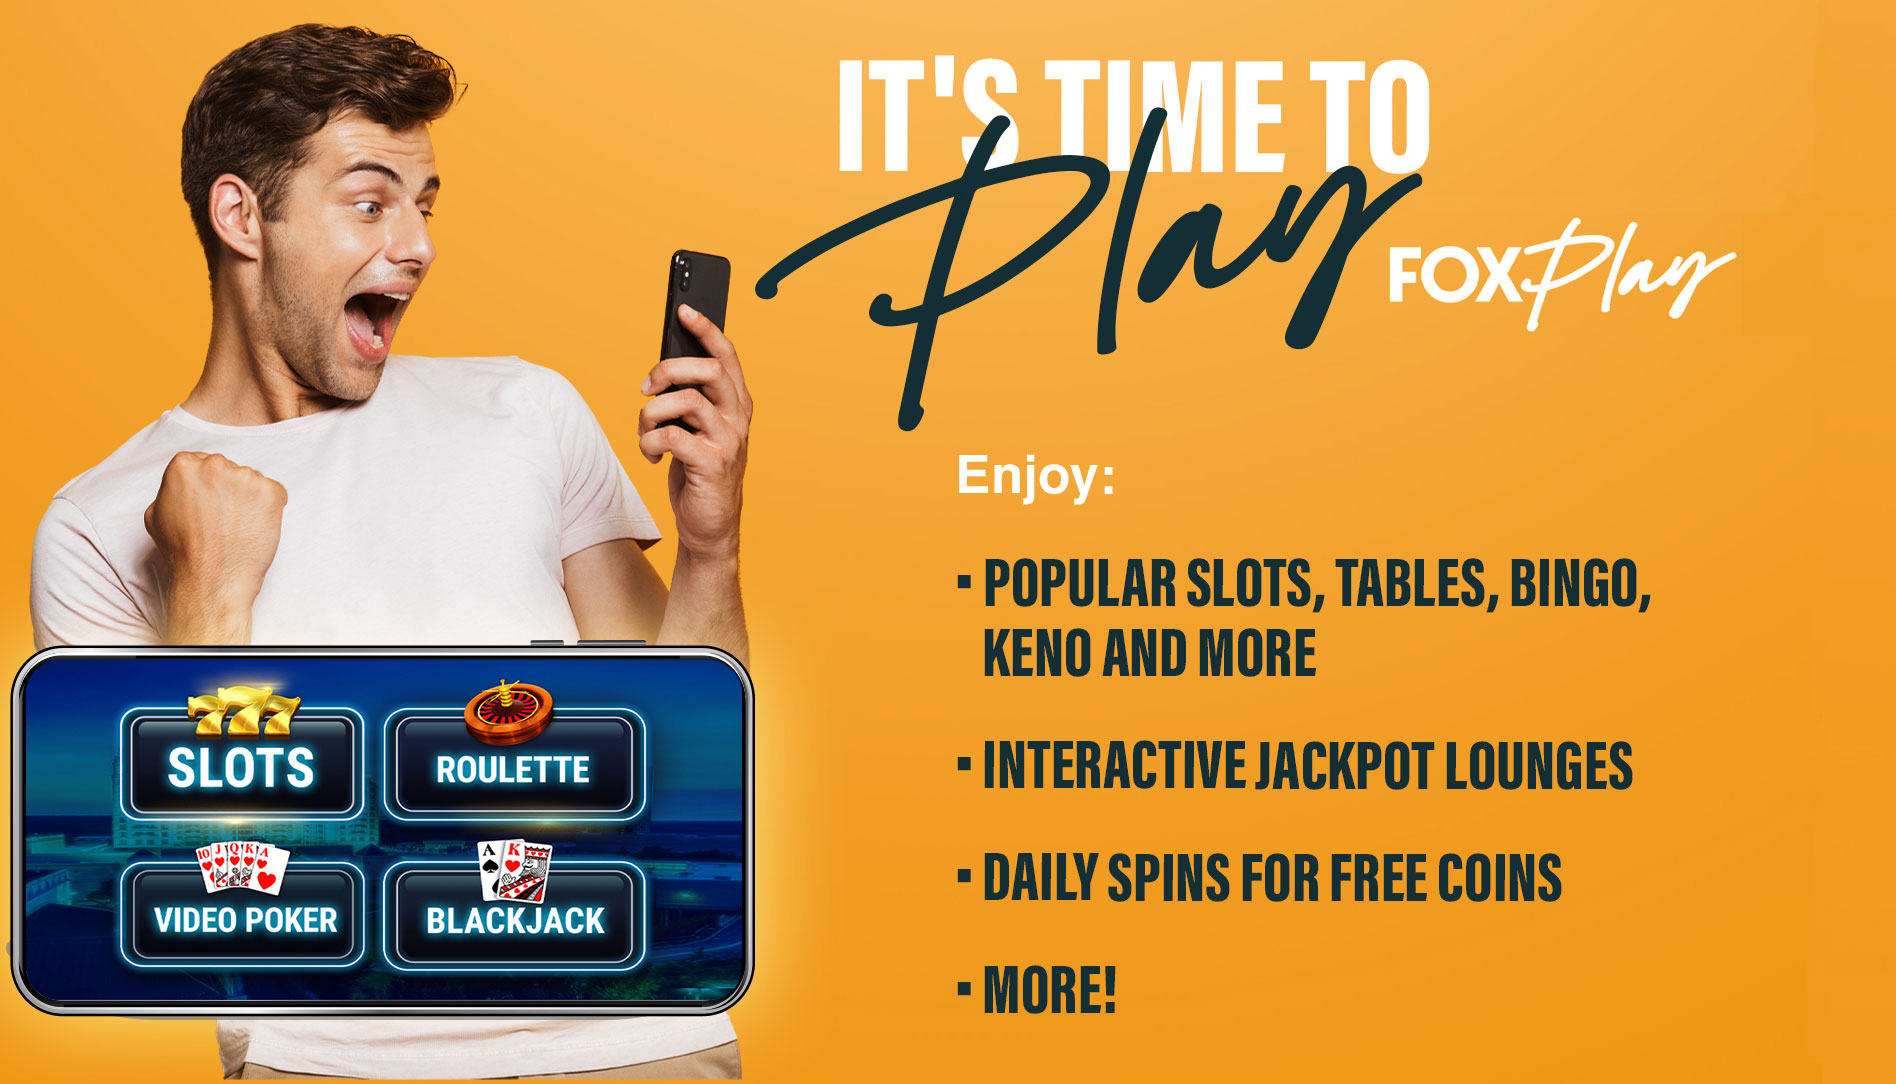 Where To Start With online casino game?